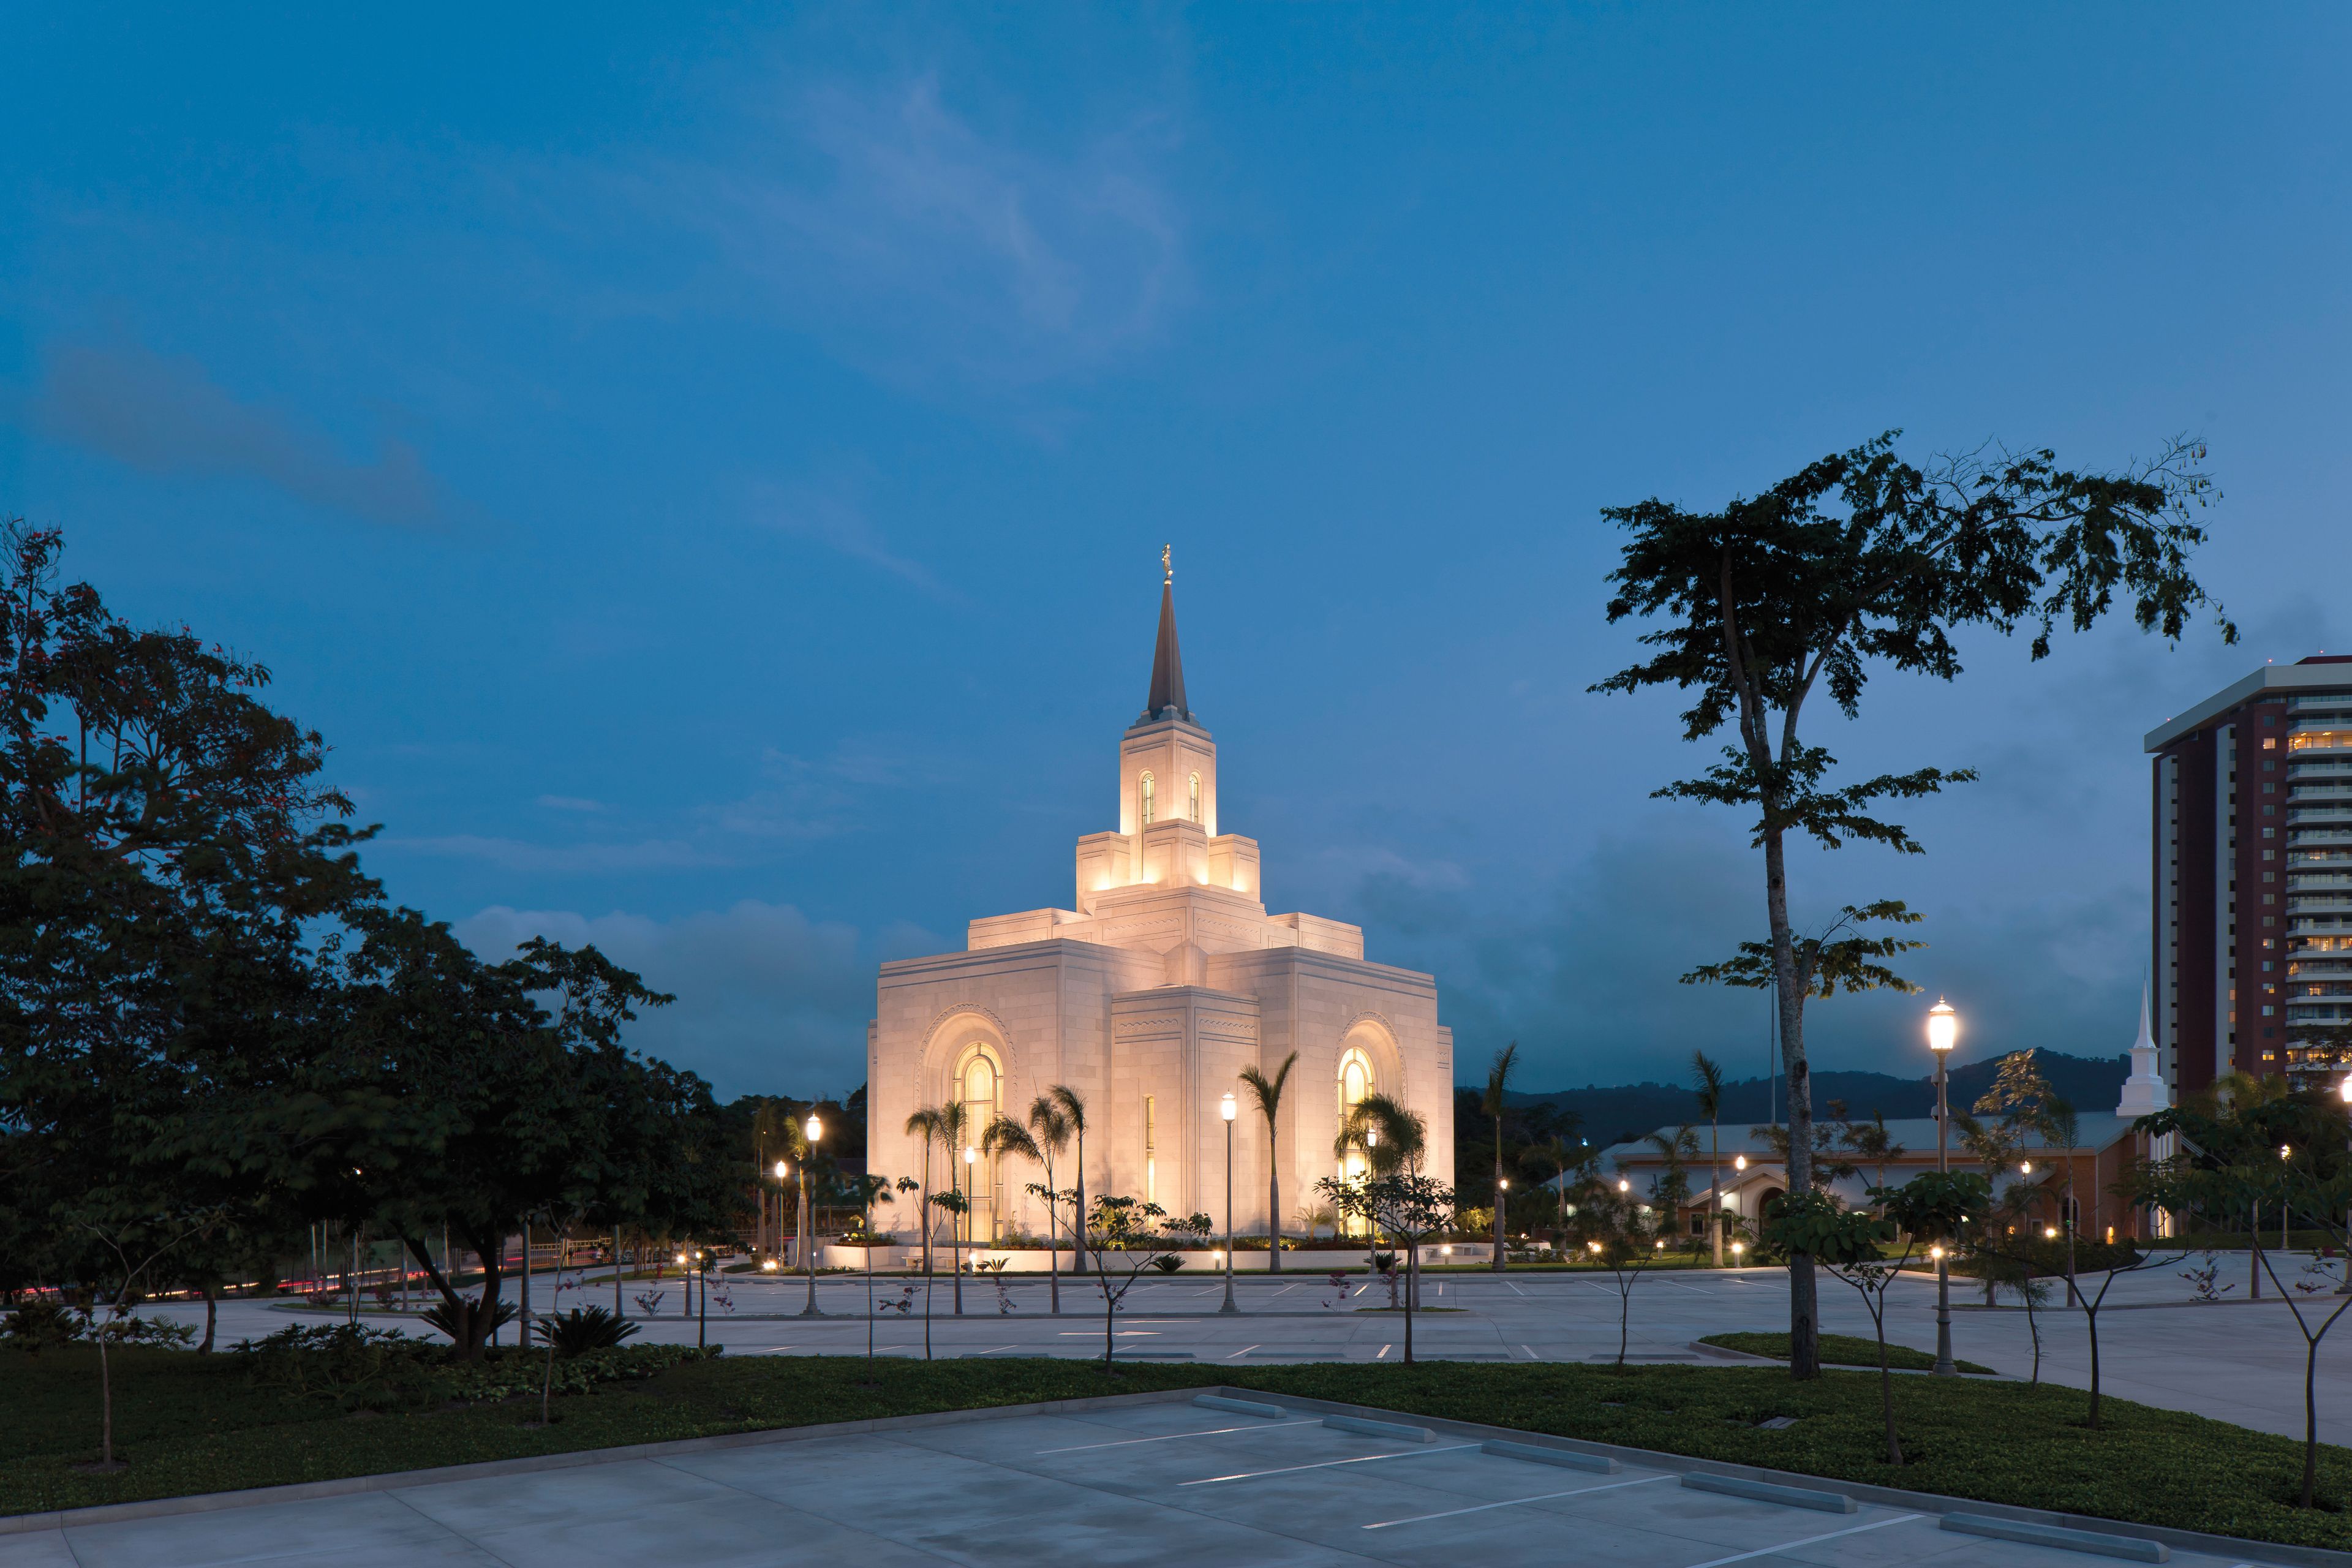 The San Salvador El Salvador Temple in the evening, including the parking lot and scenery.